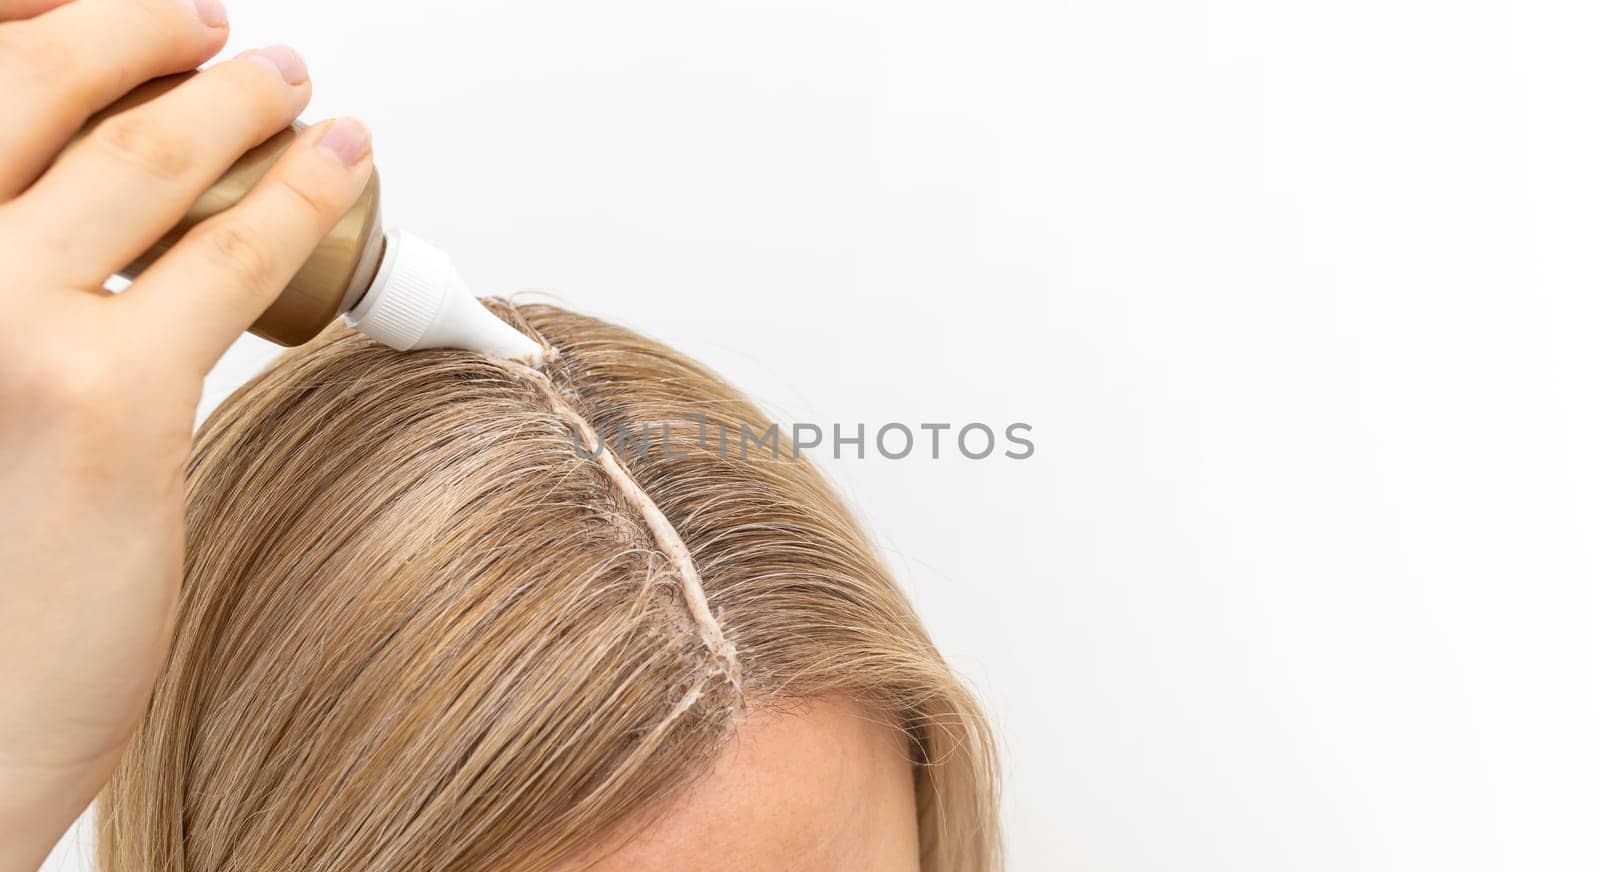 Design Middle Age Woman Applies Scalp Peeling, Scrub on Head Skin, Hair. Dandruff. Caucasian Female Holds Tube with Purifying and Soothing Cosmetics Product. Horizontal Copy Space For Text. Template.